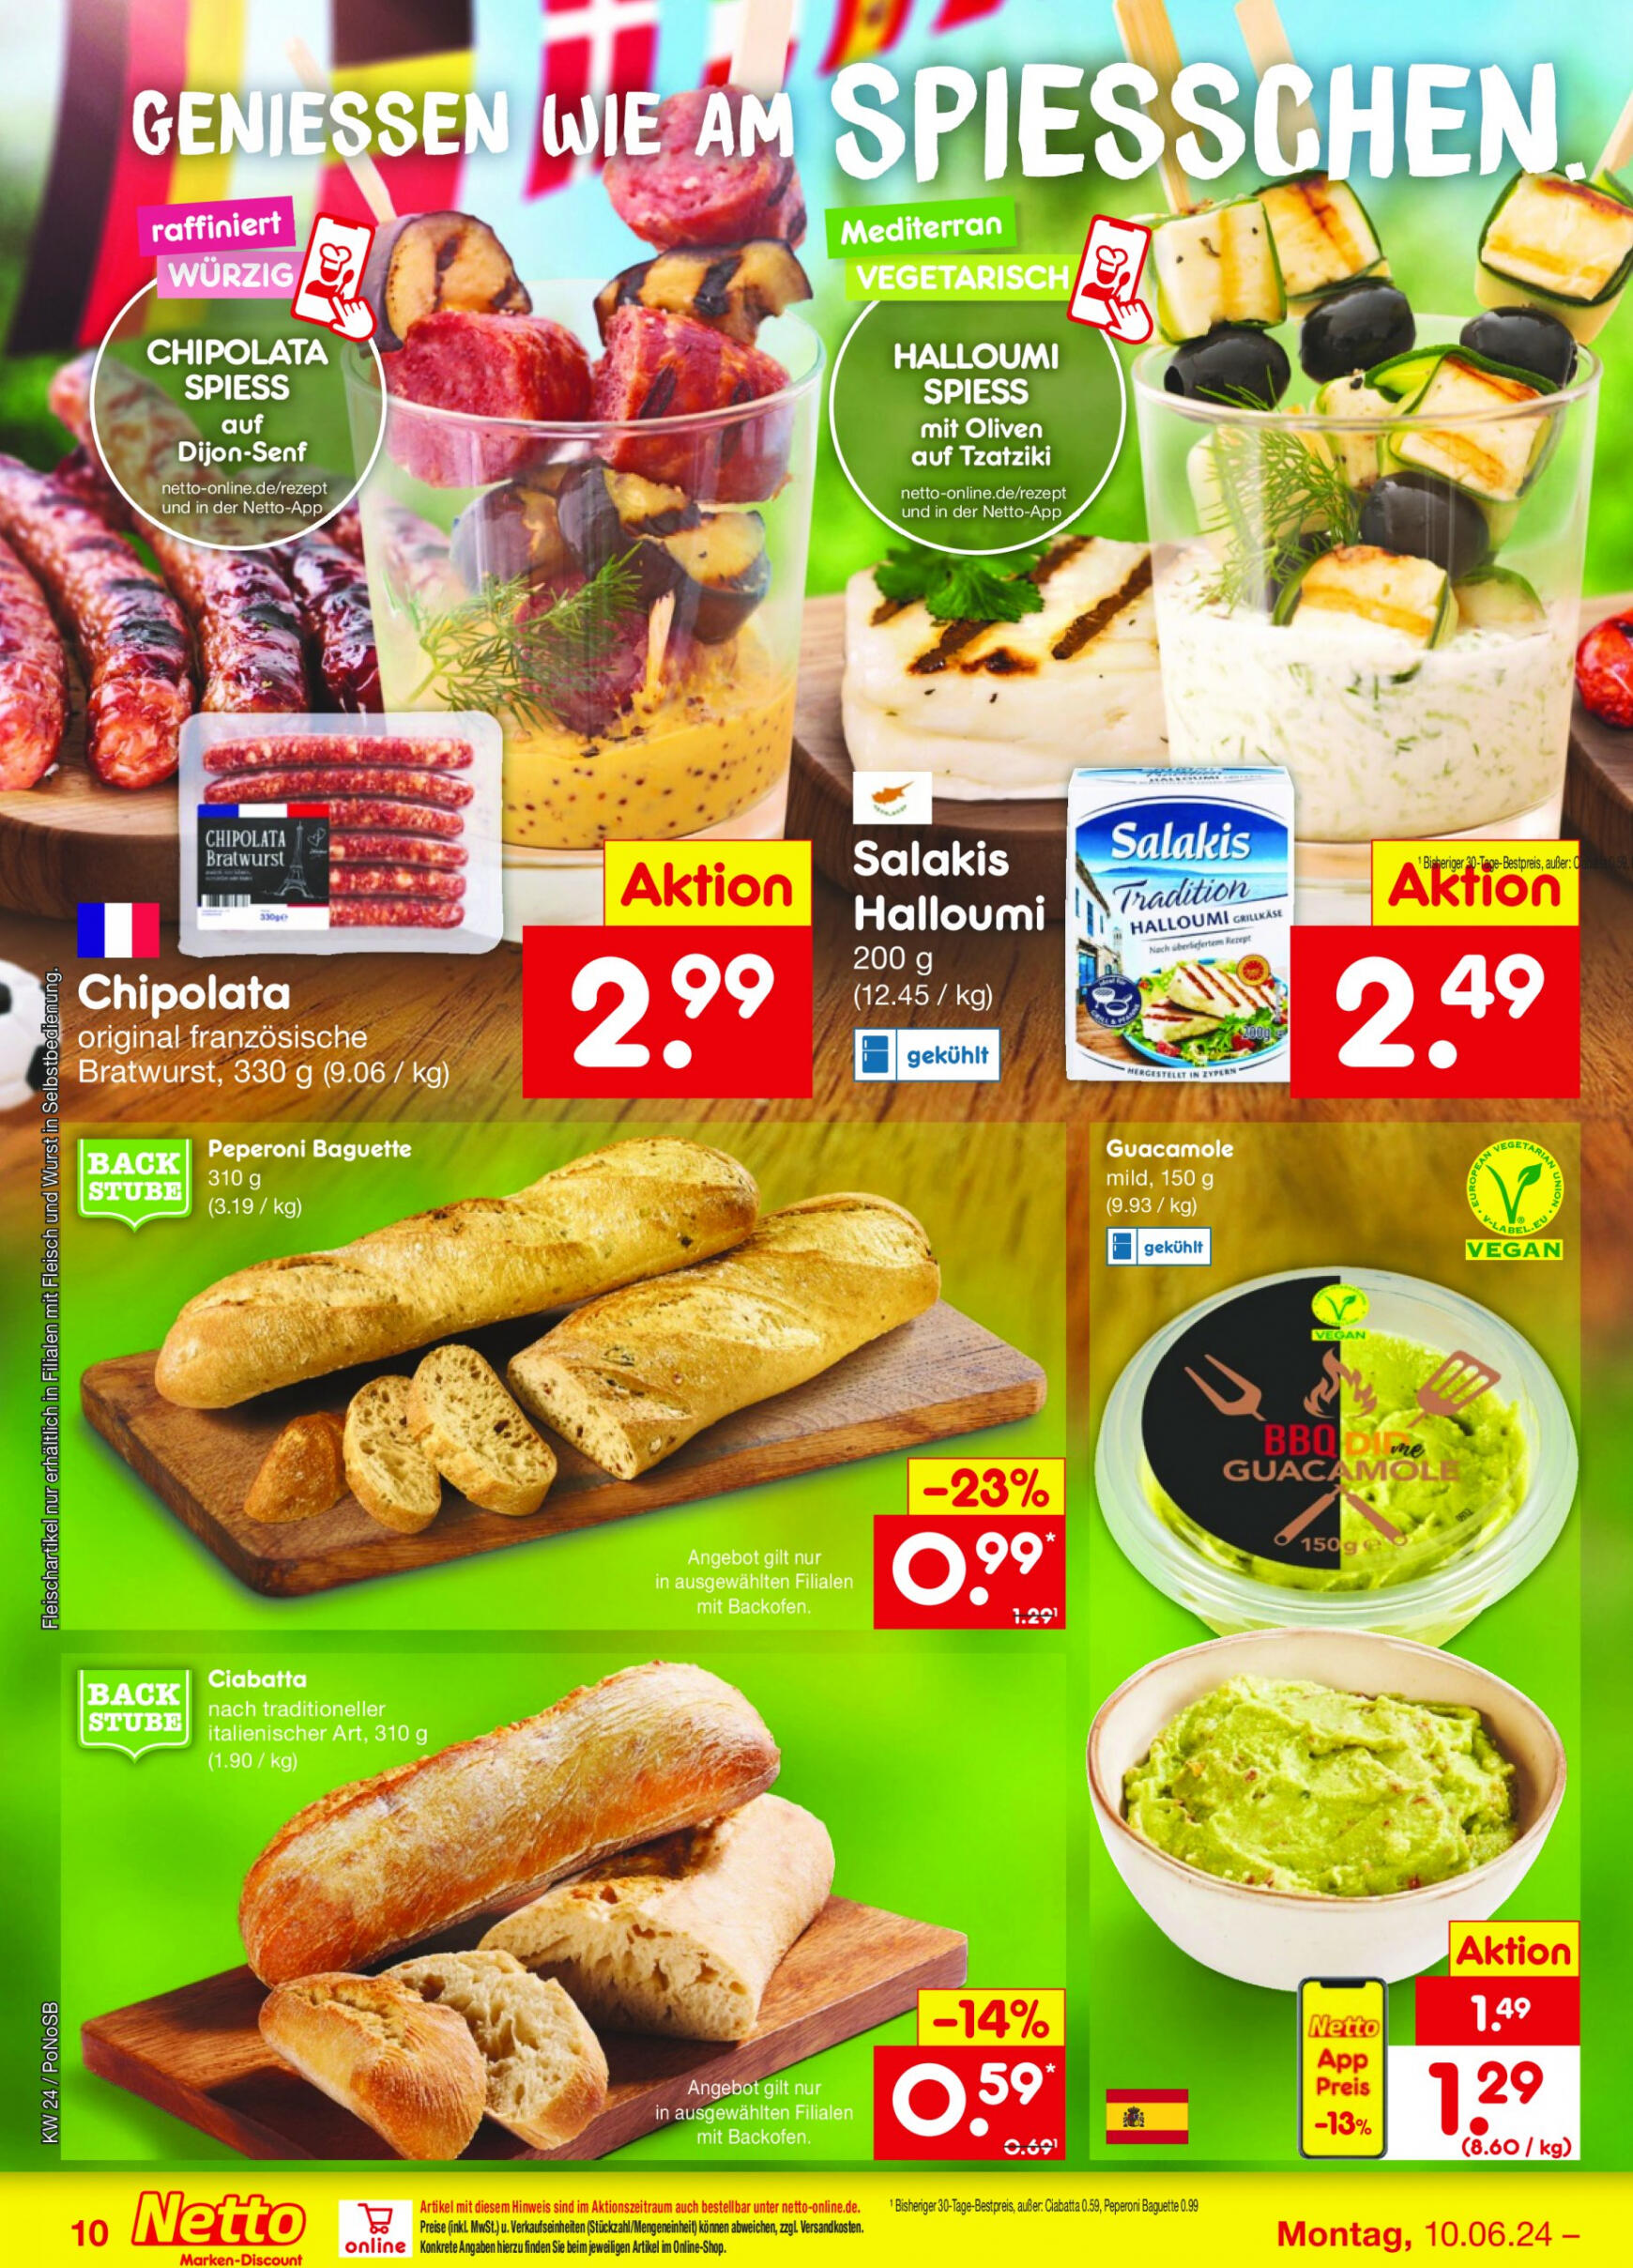 netto - Flyer Netto aktuell 10.06. - 15.06. - page: 12